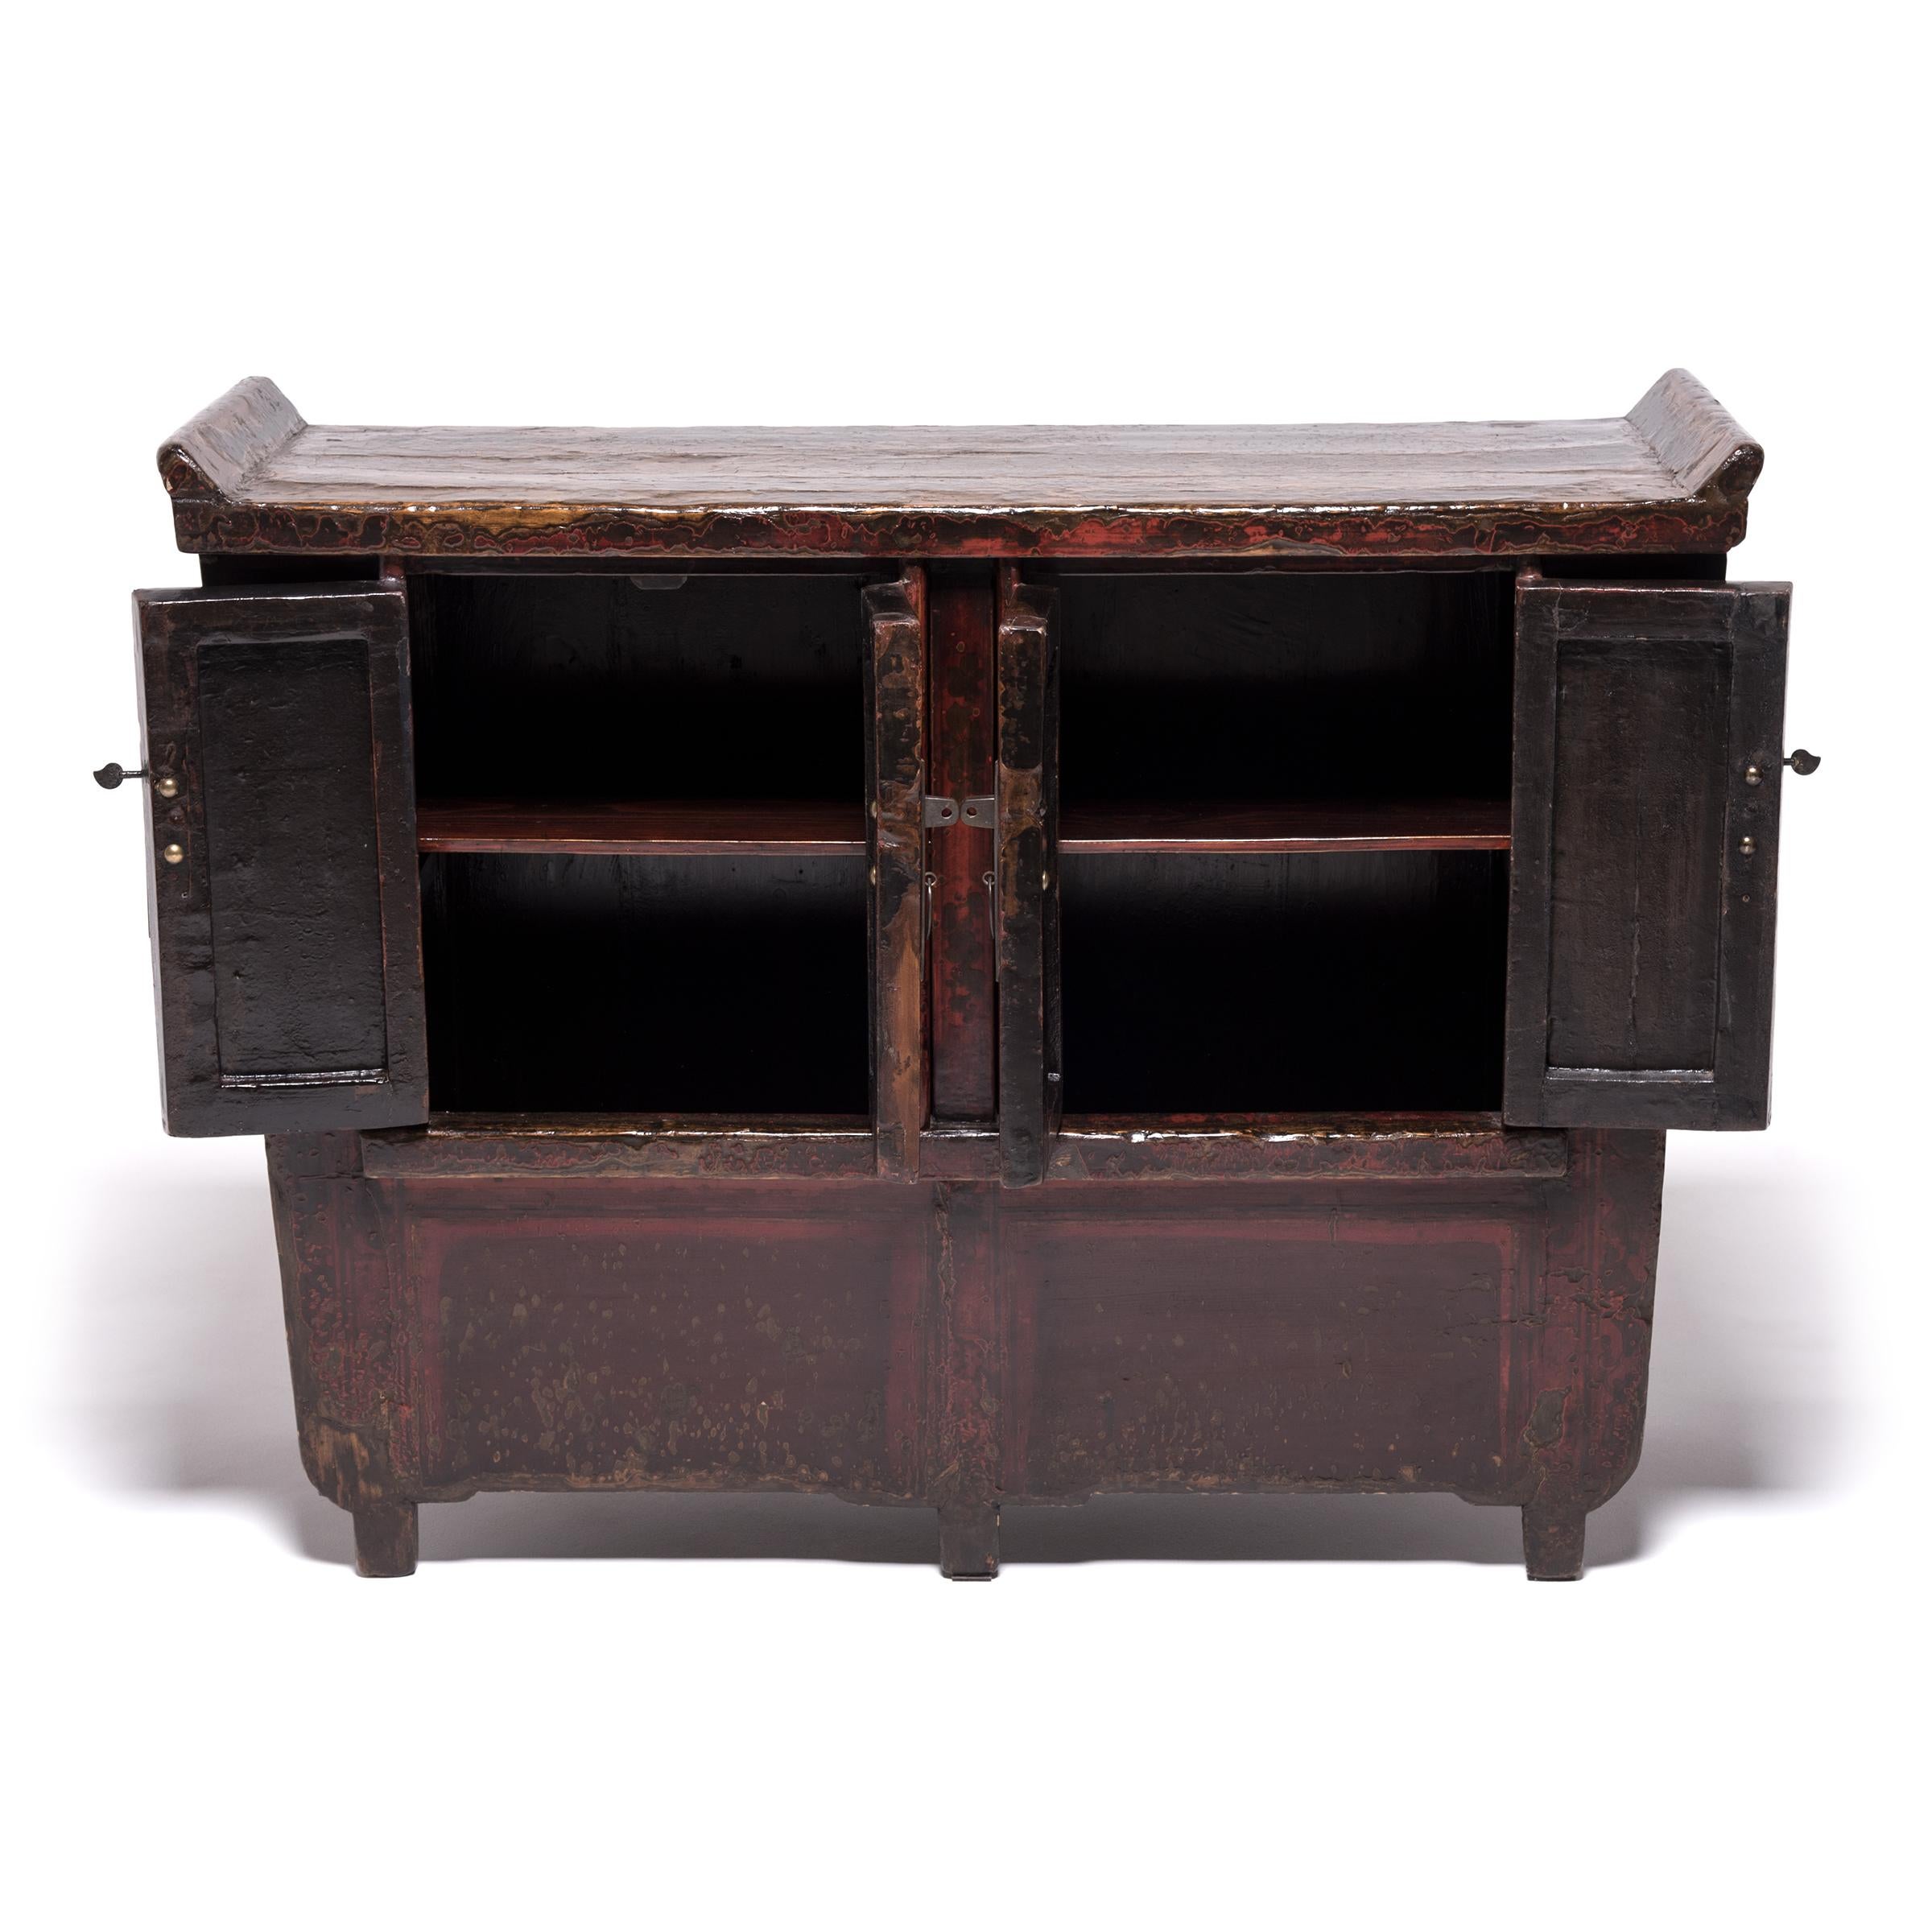 A more rustic interpretation of classic Qing-dynasty furniture, this antique chest simplifies the silhouette with pert, upturned flanges and just a hint of taper to its square frame. Once a brilliant shade of red, an emblem of joy and prosperity,